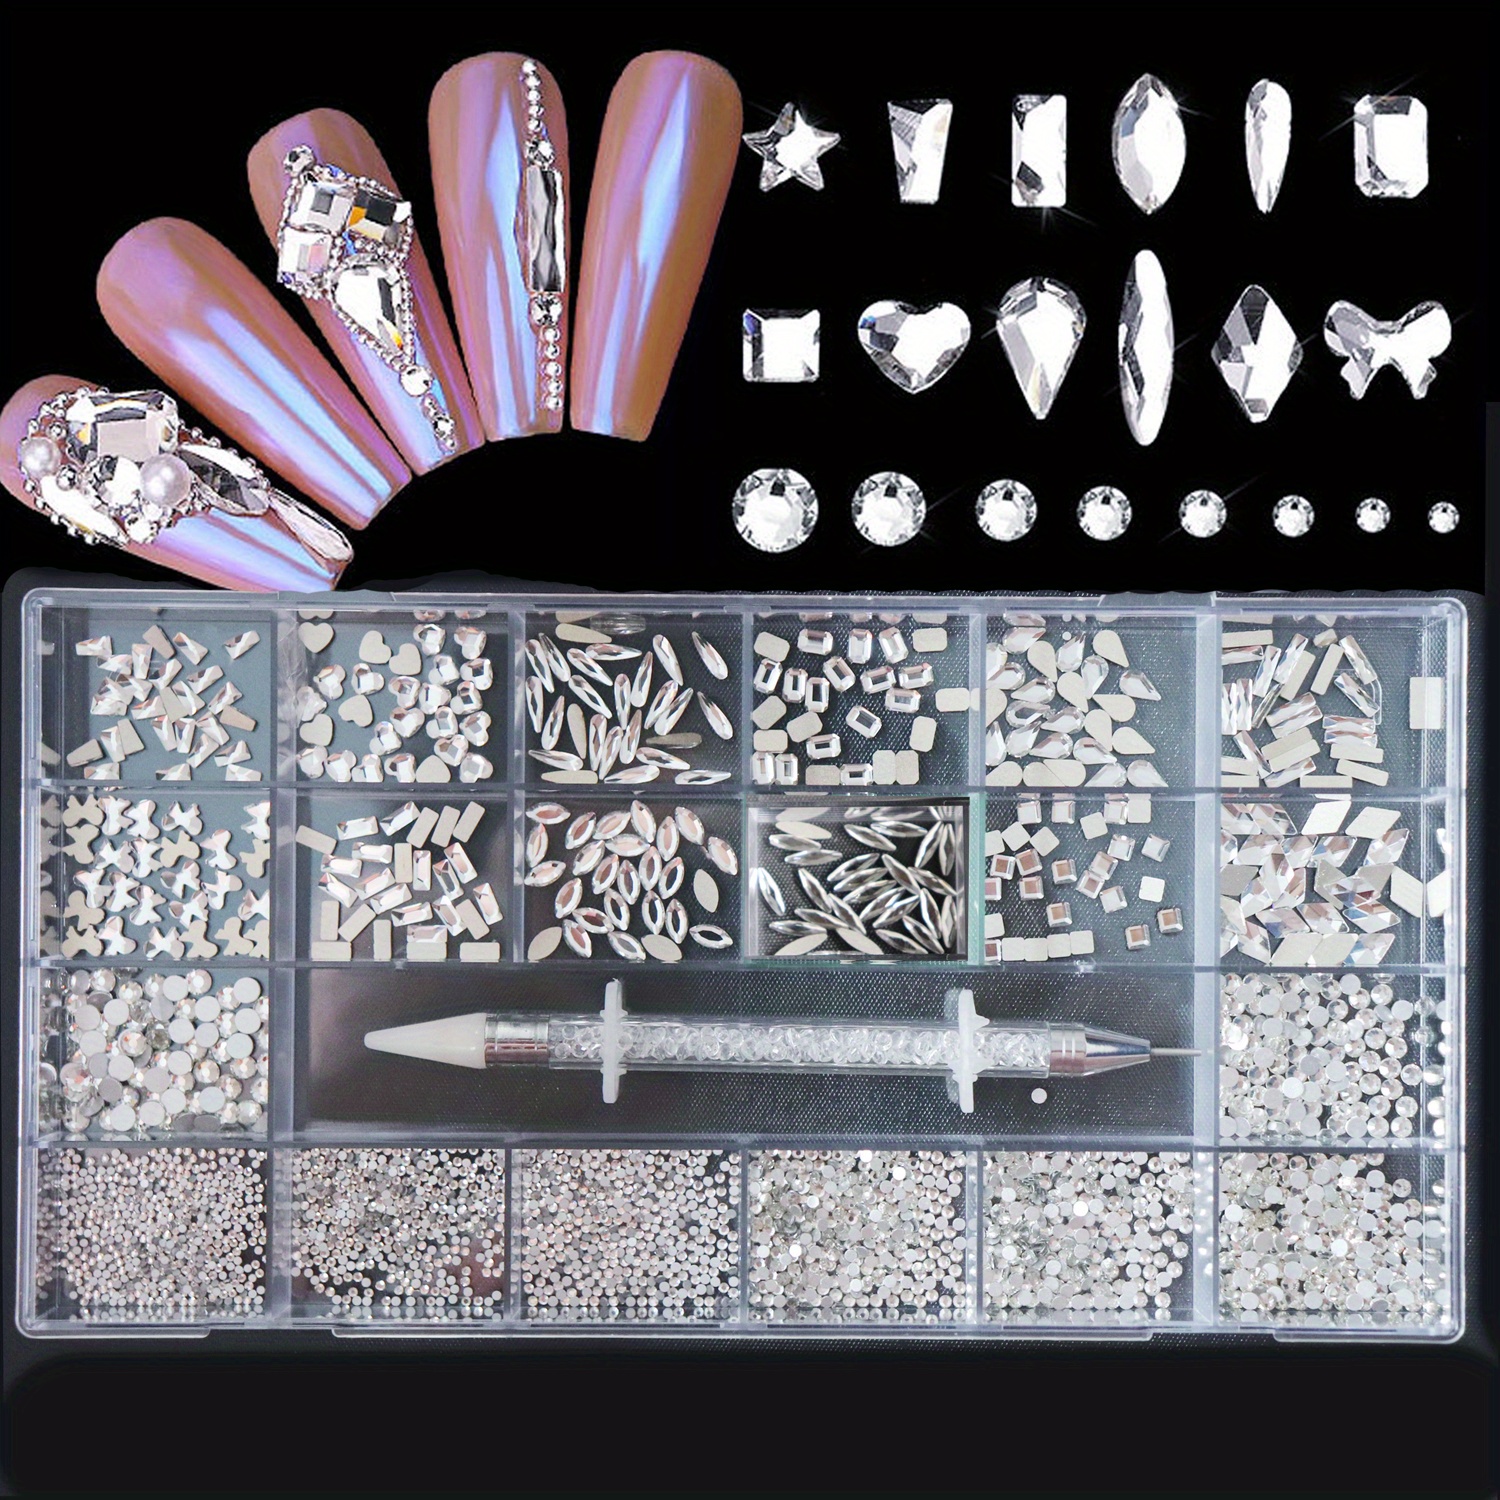  Black Nail Jewels for Nail Art - 3100pcs Crystals Rhinestones  for Nails, 12 Types of 600 Special-Shaped Stones Diamonds + 2500  Flat-Bottomed Rhinestones Kit, Swarovski Jewels for Nails DIY Design 